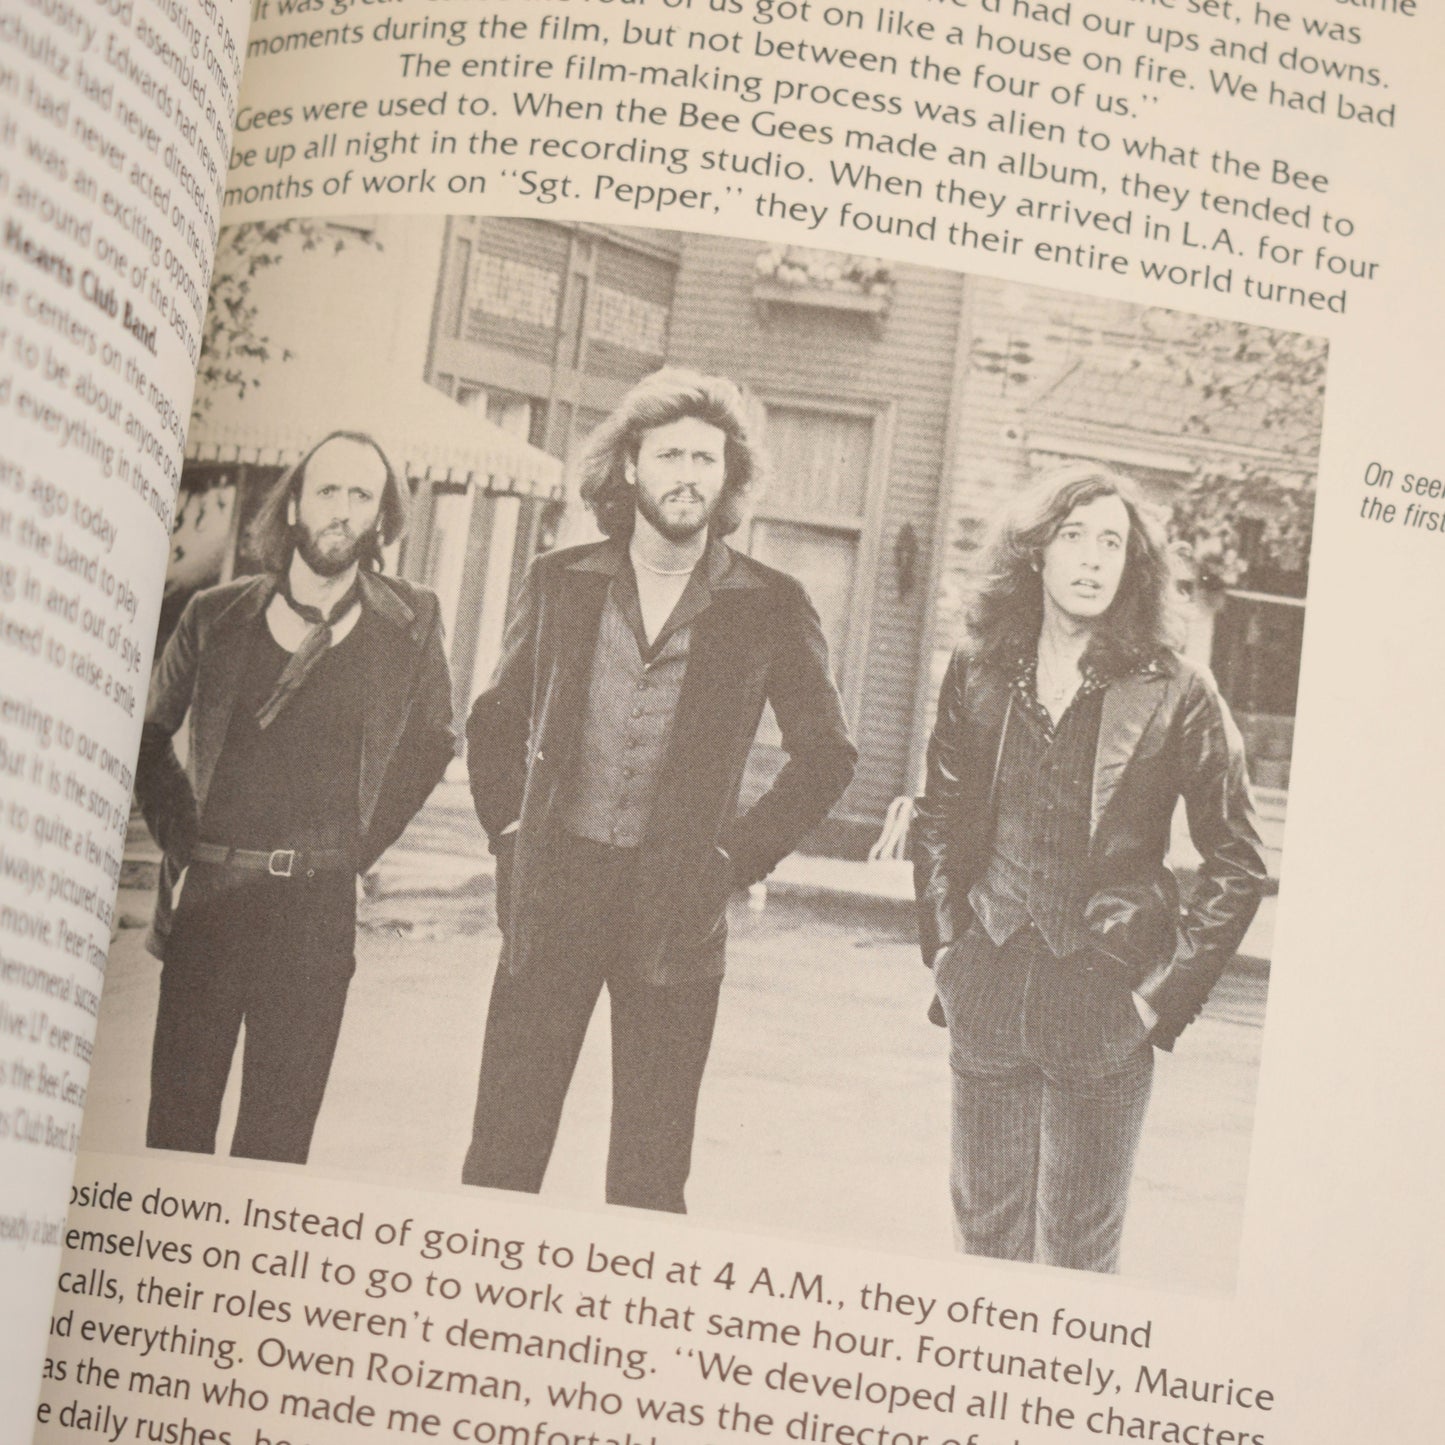 Vintage 1970s Bee Gees Authorised Biography